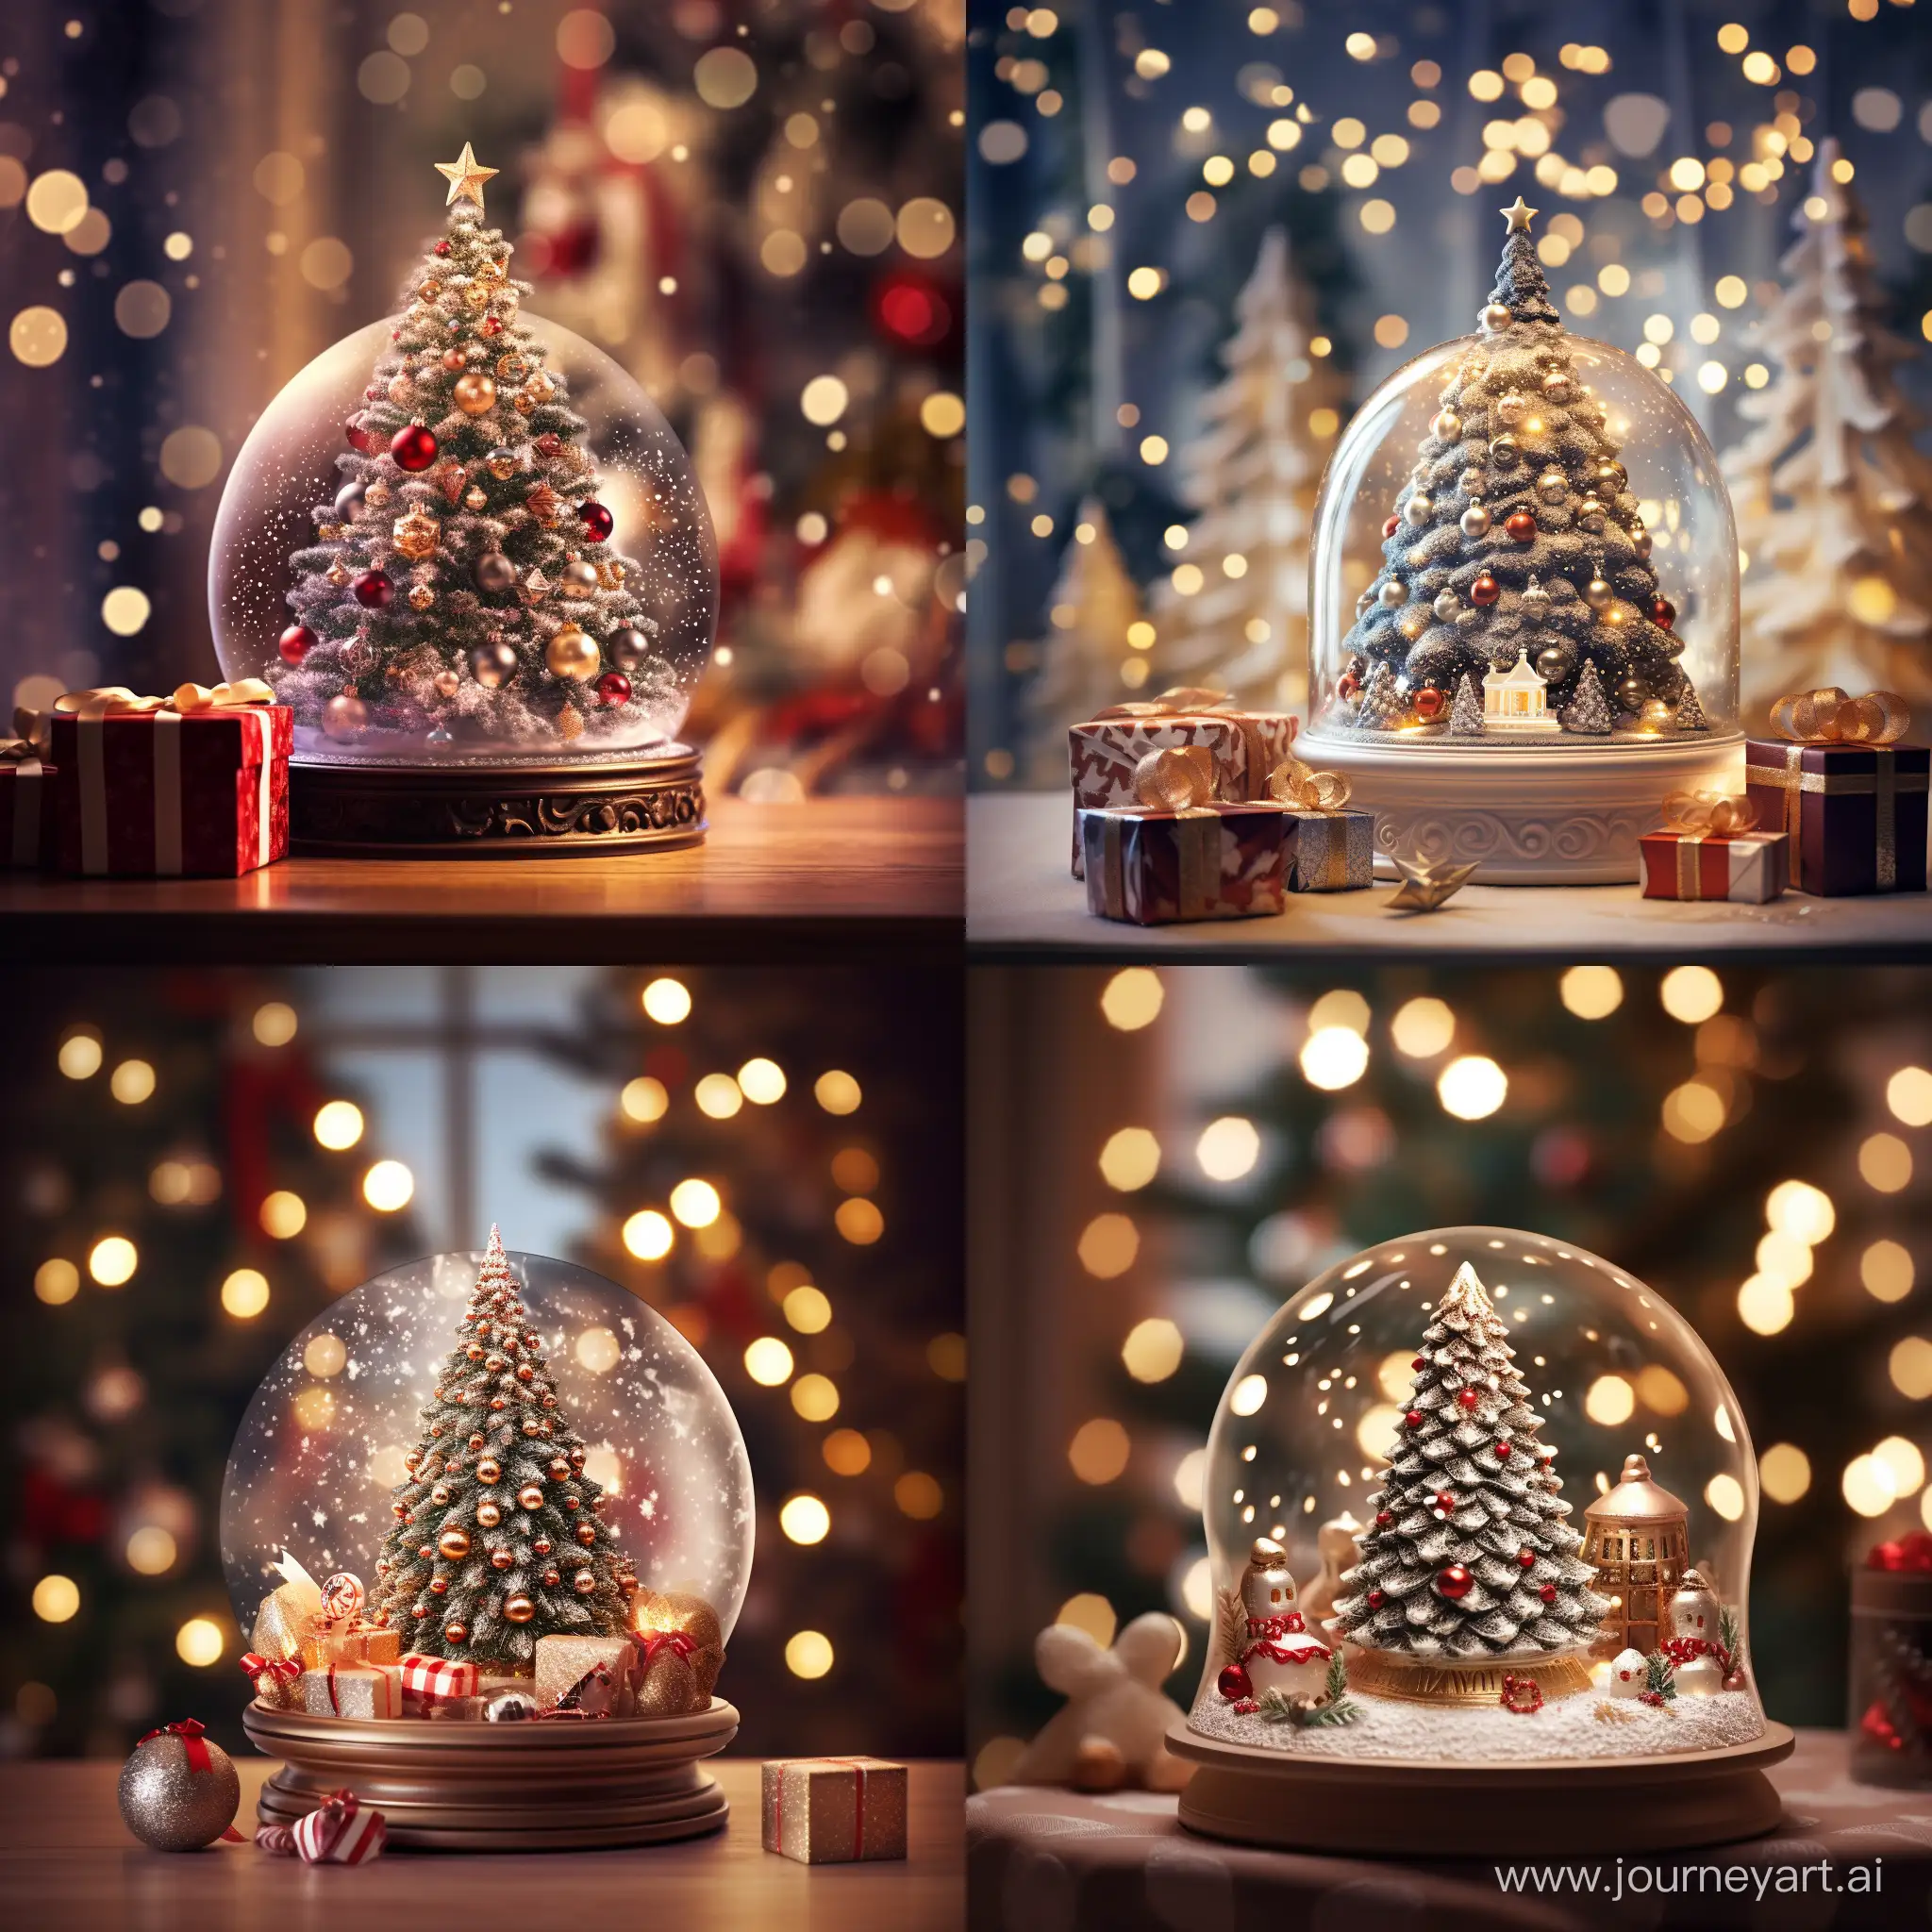 Festive-Snow-Globe-with-Christmas-Tree-and-Presents-in-a-Cozy-Room